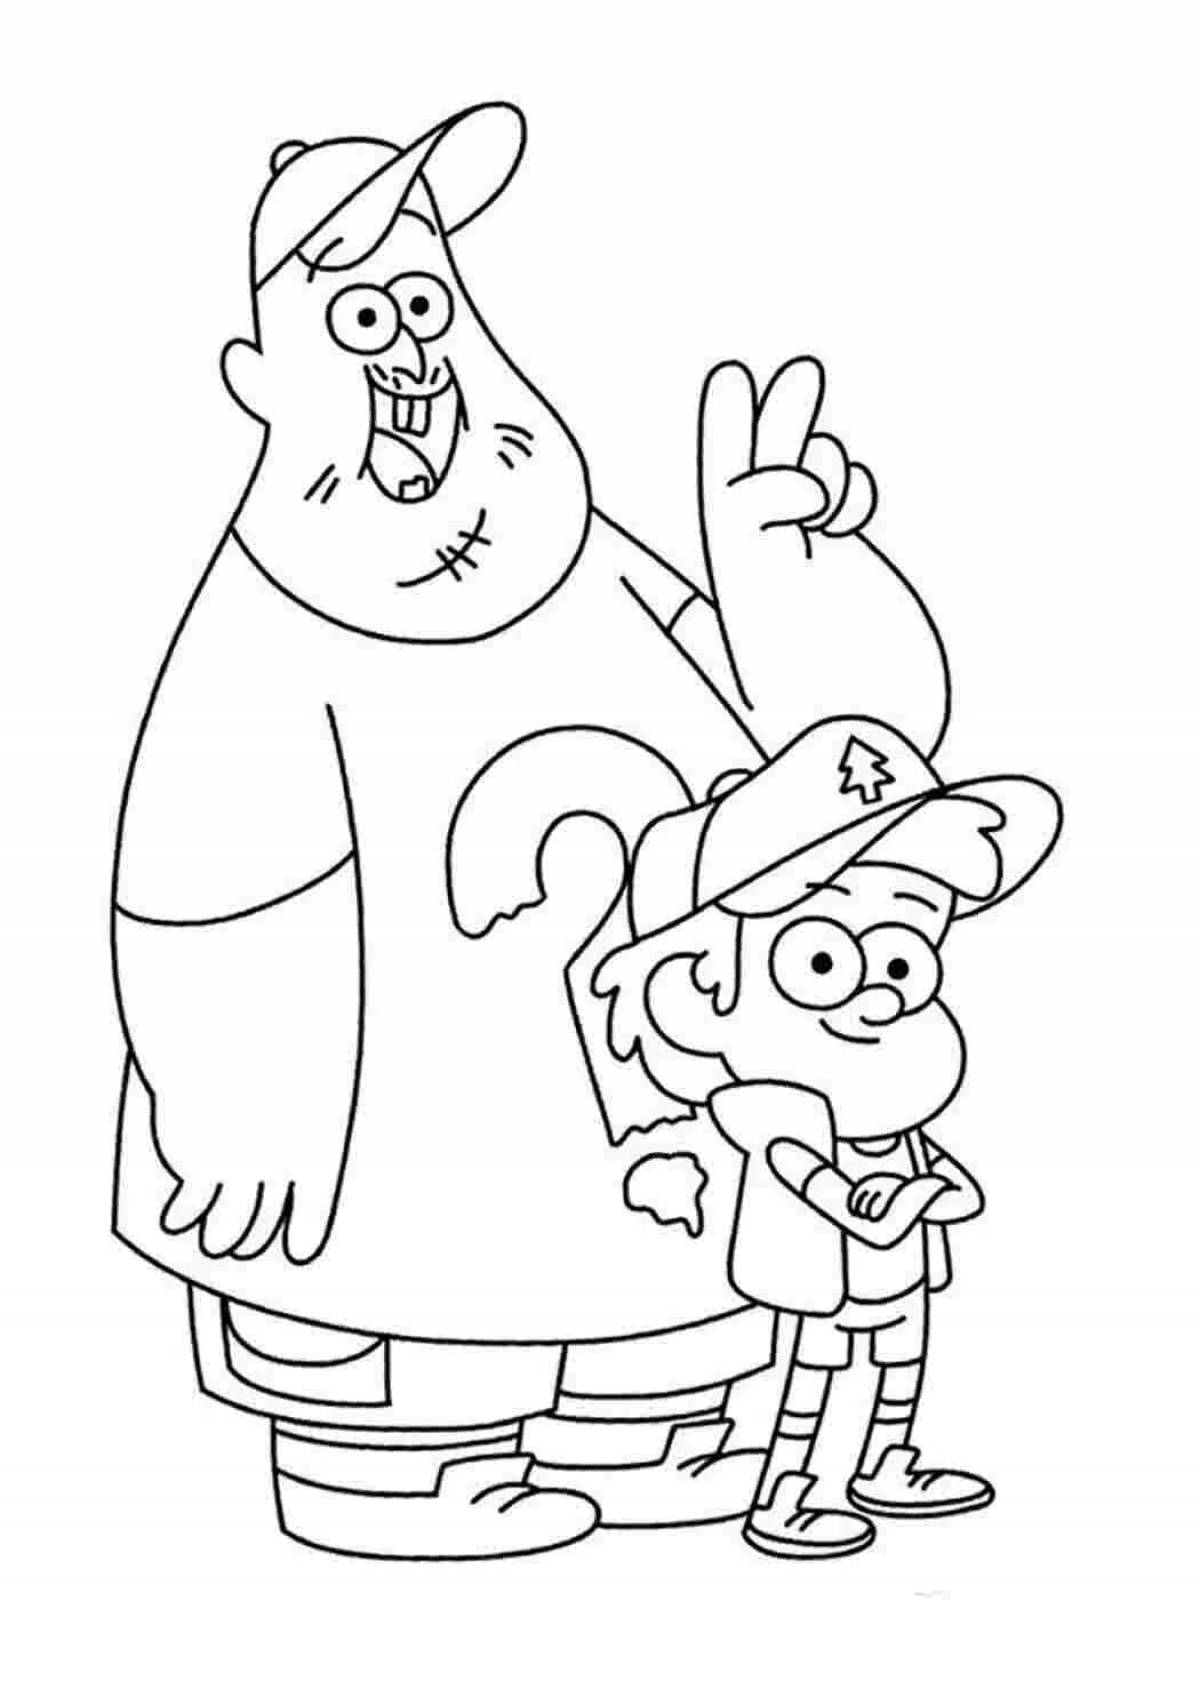 Colorful Gravity Falls Soo Coloring Page